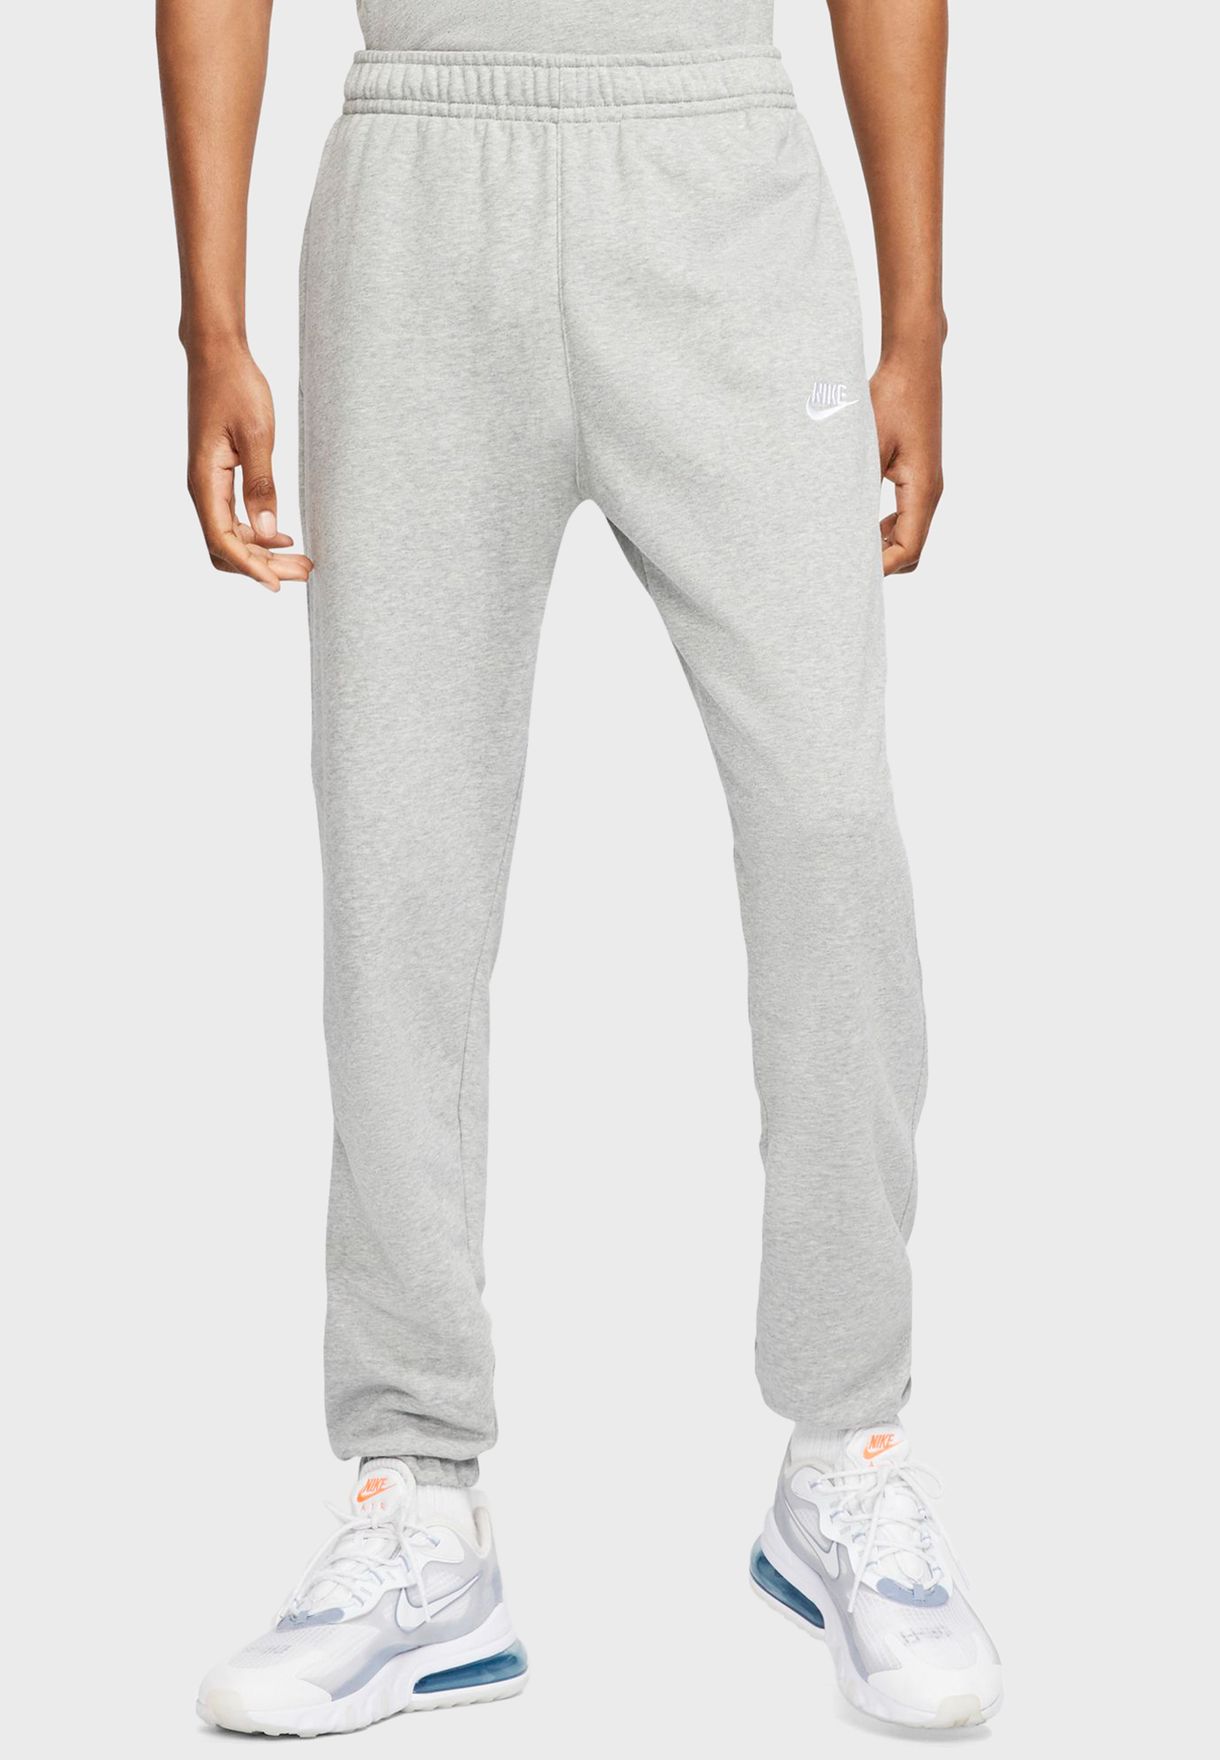 Buy Nike white Nsw Club Sweatpants for Kids in Doha, other cities